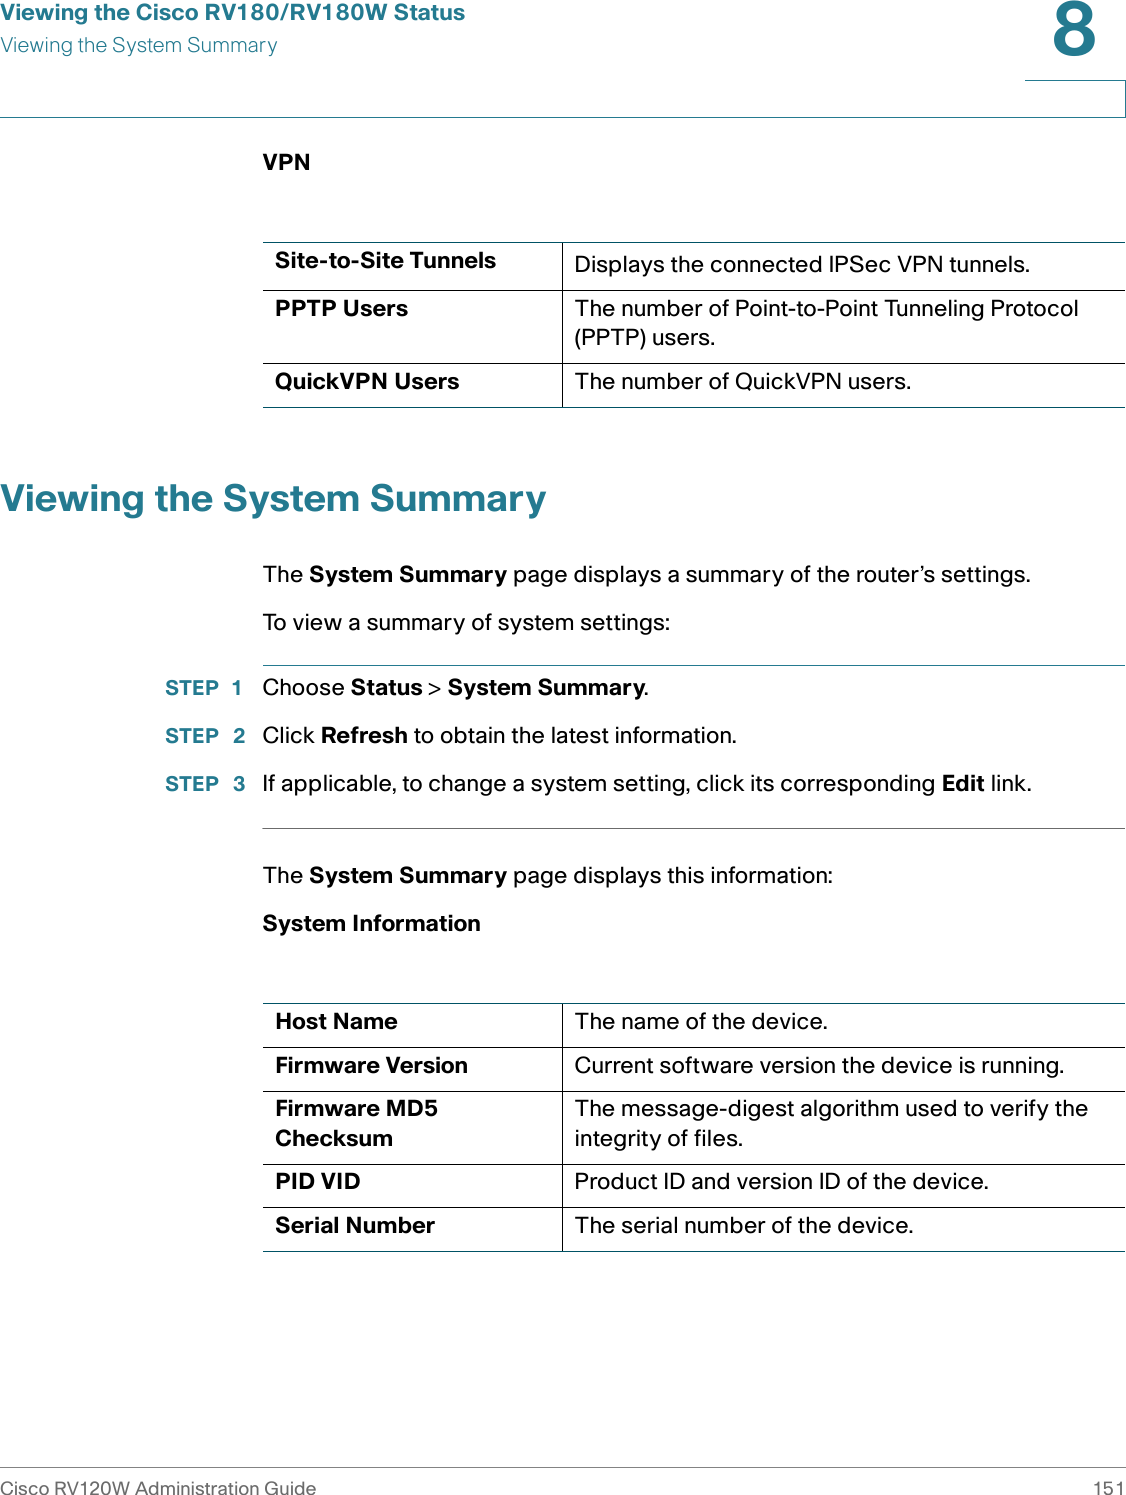 Viewing the Cisco RV180/RV180W StatusViewing the System SummaryCisco RV120W Administration Guide 1518 VPNViewing the System SummaryThe System Summary page displays a summary of the router’s settings.To view a summary of system settings:STEP 1 Choose Status &gt; System Summary. STEP  2 Click Refresh to obtain the latest information.STEP  3 If applicable, to change a system setting, click its corresponding Edit link.The System Summary page displays this information:System InformationSite-to-Site Tunnels Displays the connected IPSec VPN tunnels.PPTP Users The number of Point-to-Point Tunneling Protocol (PPTP) users.QuickVPN Users The number of QuickVPN users.Host Name The name of the device.Firmware Version Current software version the device is running.Firmware MD5 ChecksumThe message-digest algorithm used to verify the integrity of files.PID VID Product ID and version ID of the device.Serial Number The serial number of the device.